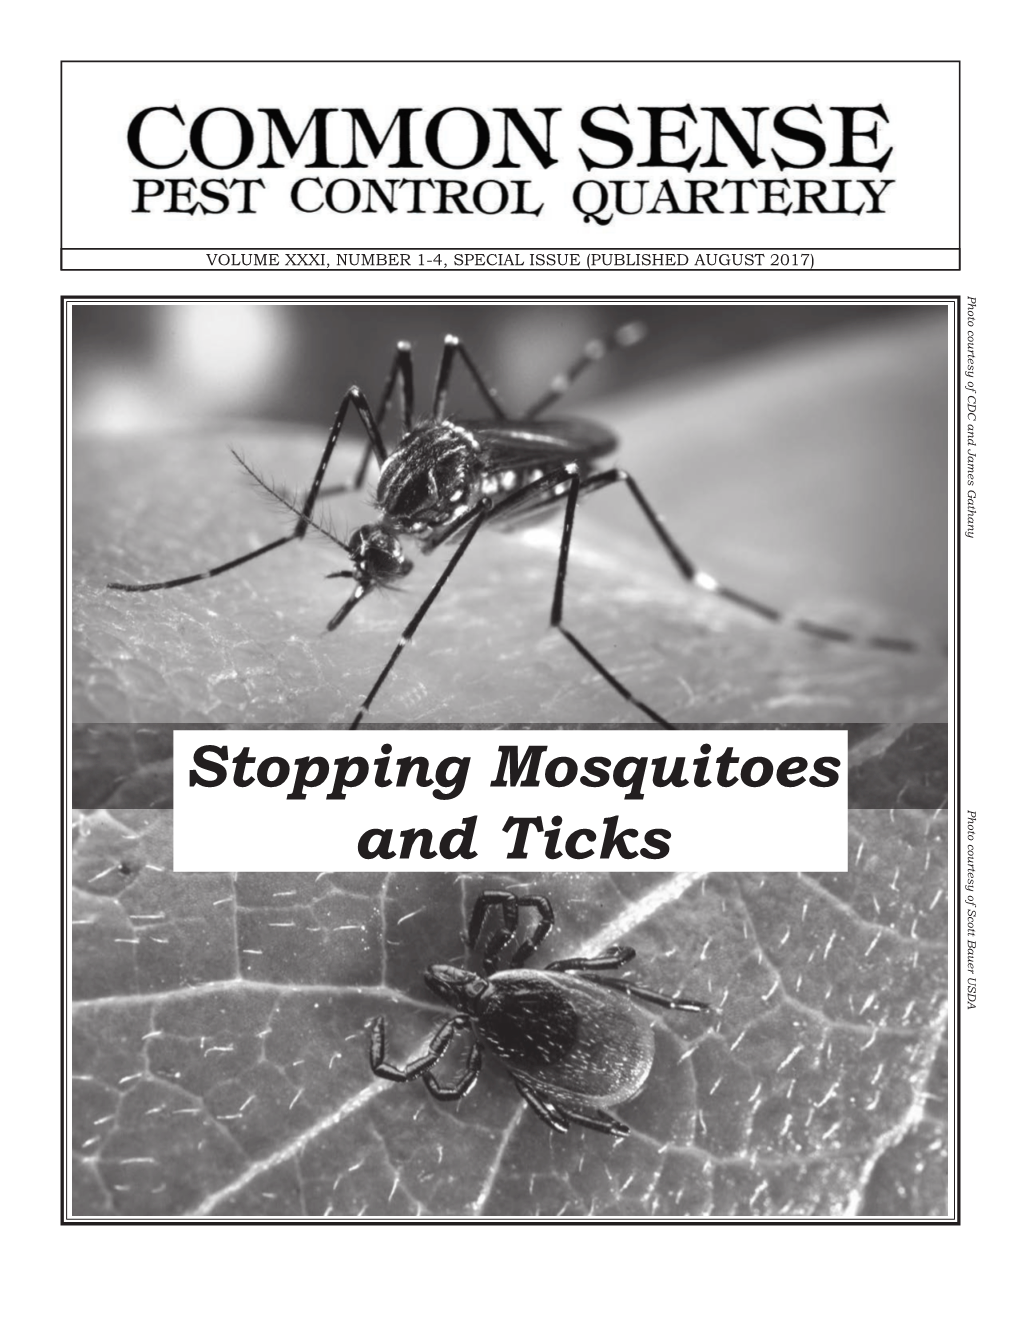 Stopping Mosquitoes and Ticks